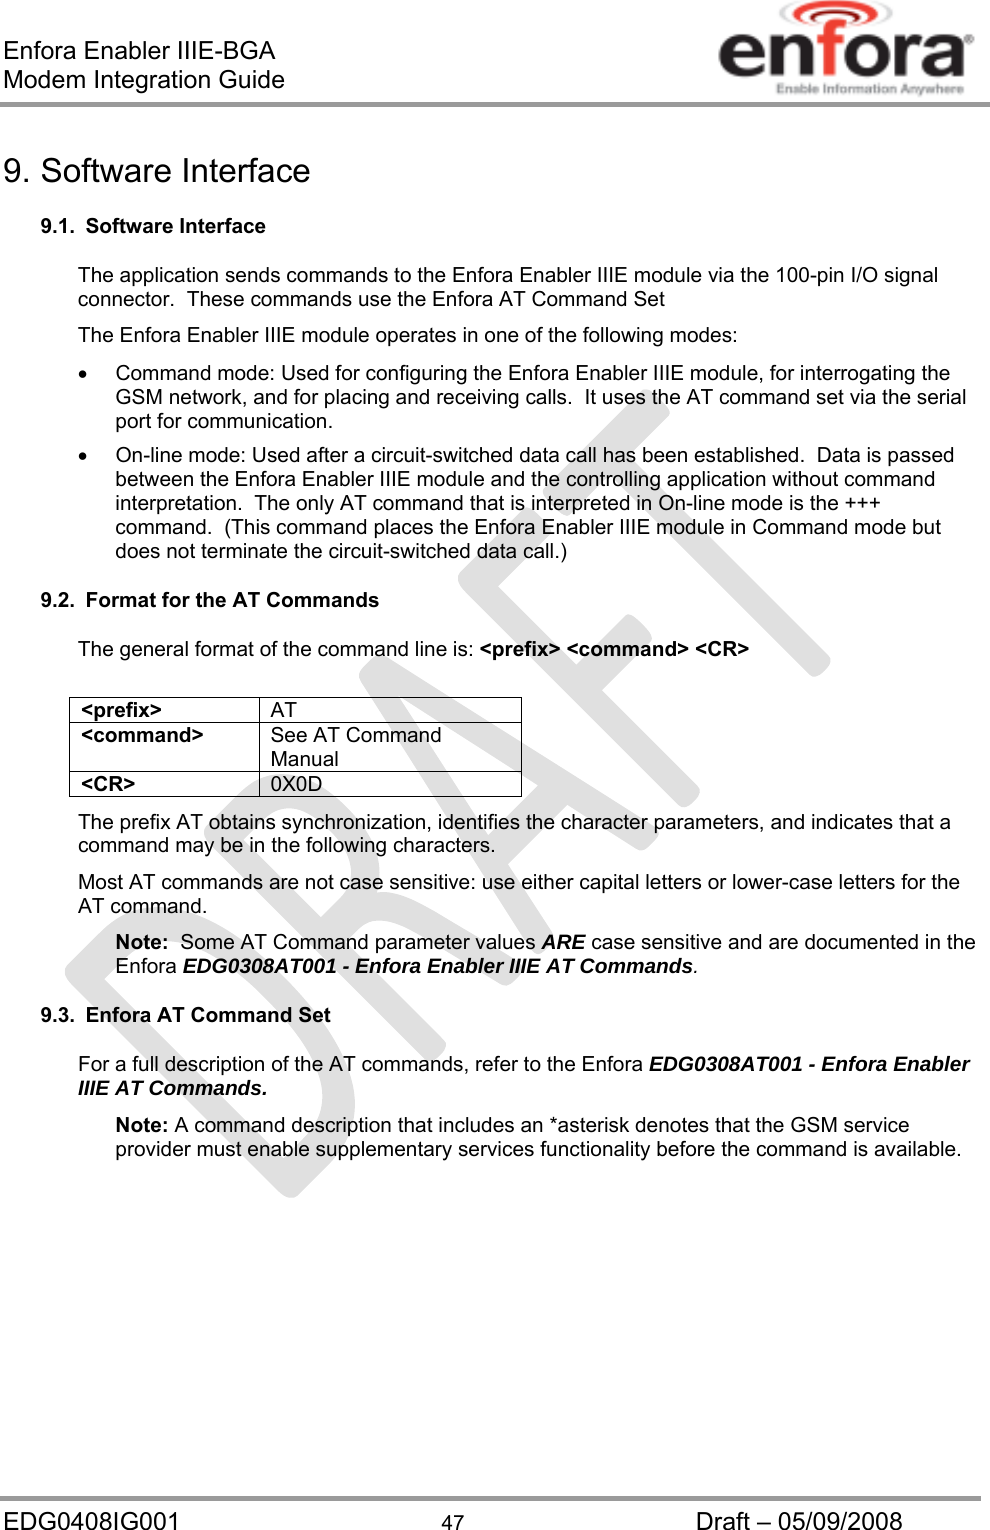 Enfora Enabler IIIE-BGA Modem Integration Guide EDG0408IG001  47  Draft – 05/09/2008 9. Software Interface 9.1. Software Interface The application sends commands to the Enfora Enabler IIIE module via the 100-pin I/O signal connector.  These commands use the Enfora AT Command Set  The Enfora Enabler IIIE module operates in one of the following modes:   Command mode: Used for configuring the Enfora Enabler IIIE module, for interrogating the GSM network, and for placing and receiving calls.  It uses the AT command set via the serial port for communication.   On-line mode: Used after a circuit-switched data call has been established.  Data is passed between the Enfora Enabler IIIE module and the controlling application without command interpretation.  The only AT command that is interpreted in On-line mode is the +++ command.  (This command places the Enfora Enabler IIIE module in Command mode but does not terminate the circuit-switched data call.) 9.2.  Format for the AT Commands The general format of the command line is: &lt;prefix&gt; &lt;command&gt; &lt;CR&gt;  &lt;prefix&gt;  AT &lt;command&gt;  See AT Command Manual &lt;CR&gt;  0X0D The prefix AT obtains synchronization, identifies the character parameters, and indicates that a command may be in the following characters. Most AT commands are not case sensitive: use either capital letters or lower-case letters for the AT command.   Note:  Some AT Command parameter values ARE case sensitive and are documented in the Enfora EDG0308AT001 - Enfora Enabler IIIE AT Commands. 9.3.  Enfora AT Command Set For a full description of the AT commands, refer to the Enfora EDG0308AT001 - Enfora Enabler IIIE AT Commands. Note: A command description that includes an *asterisk denotes that the GSM service provider must enable supplementary services functionality before the command is available. 